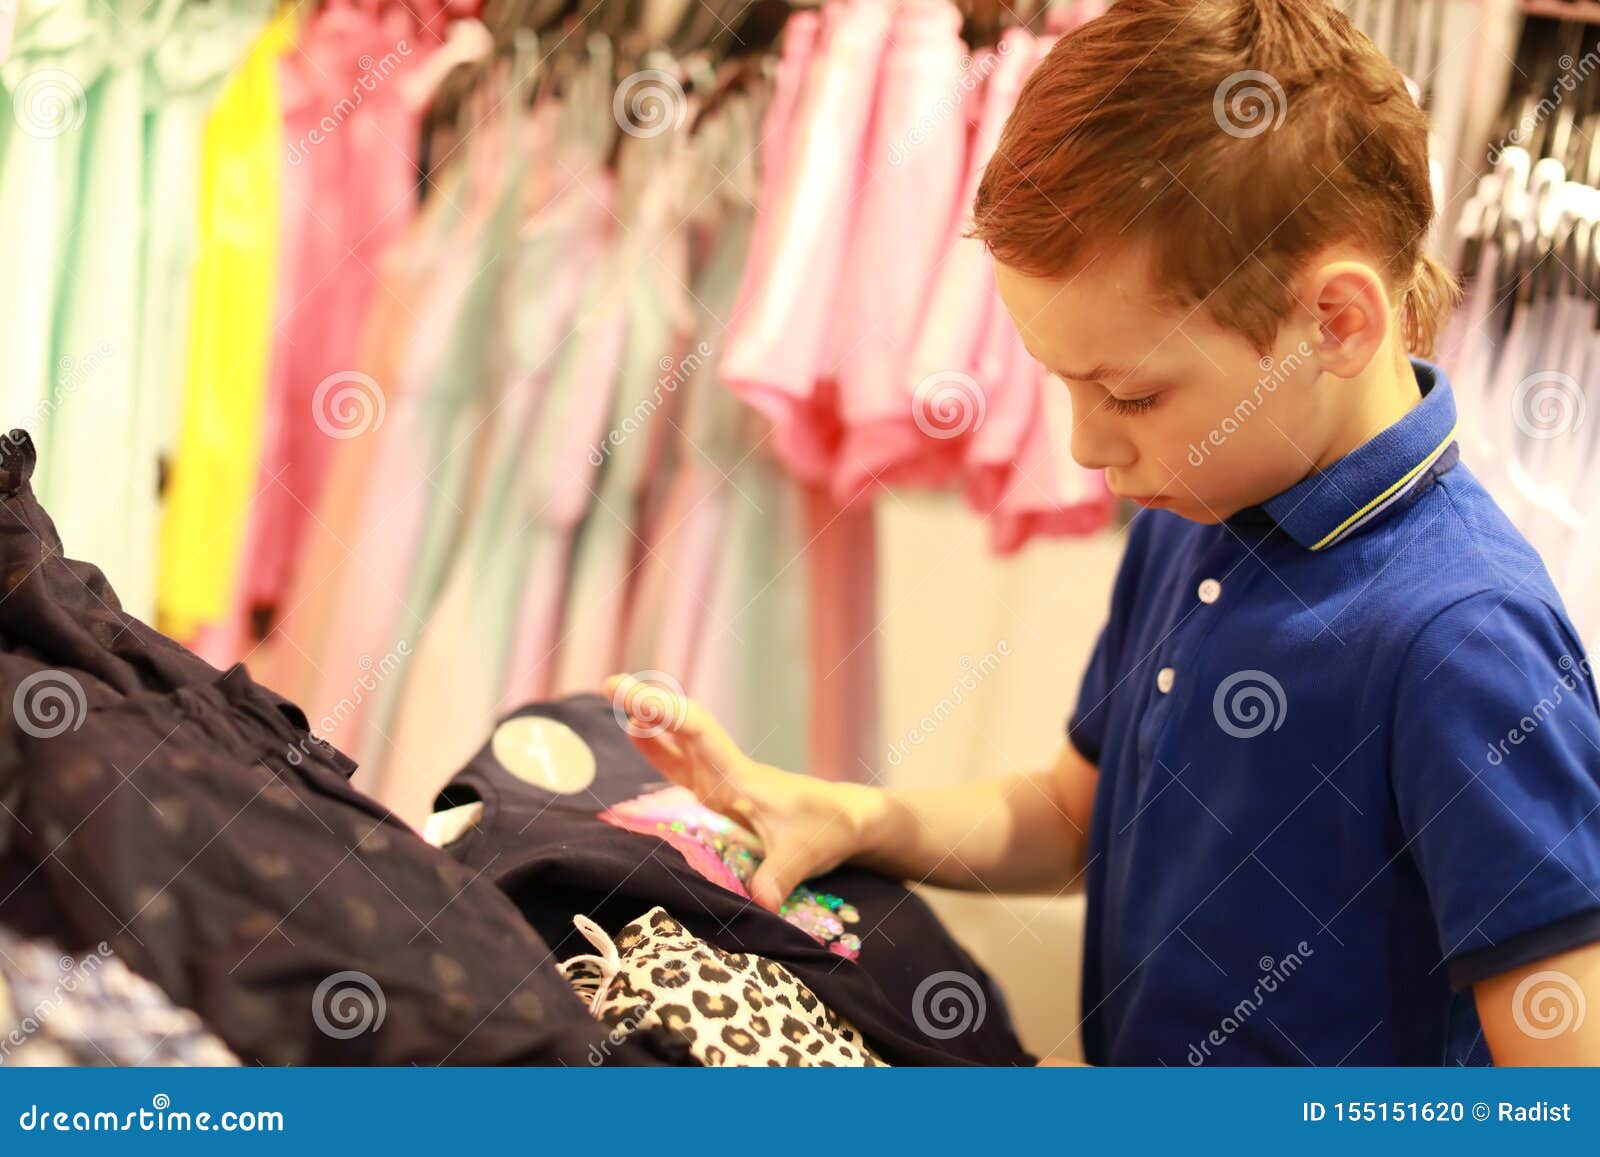 Child in clothing store stock photo. Image of lifestyle - 155151620